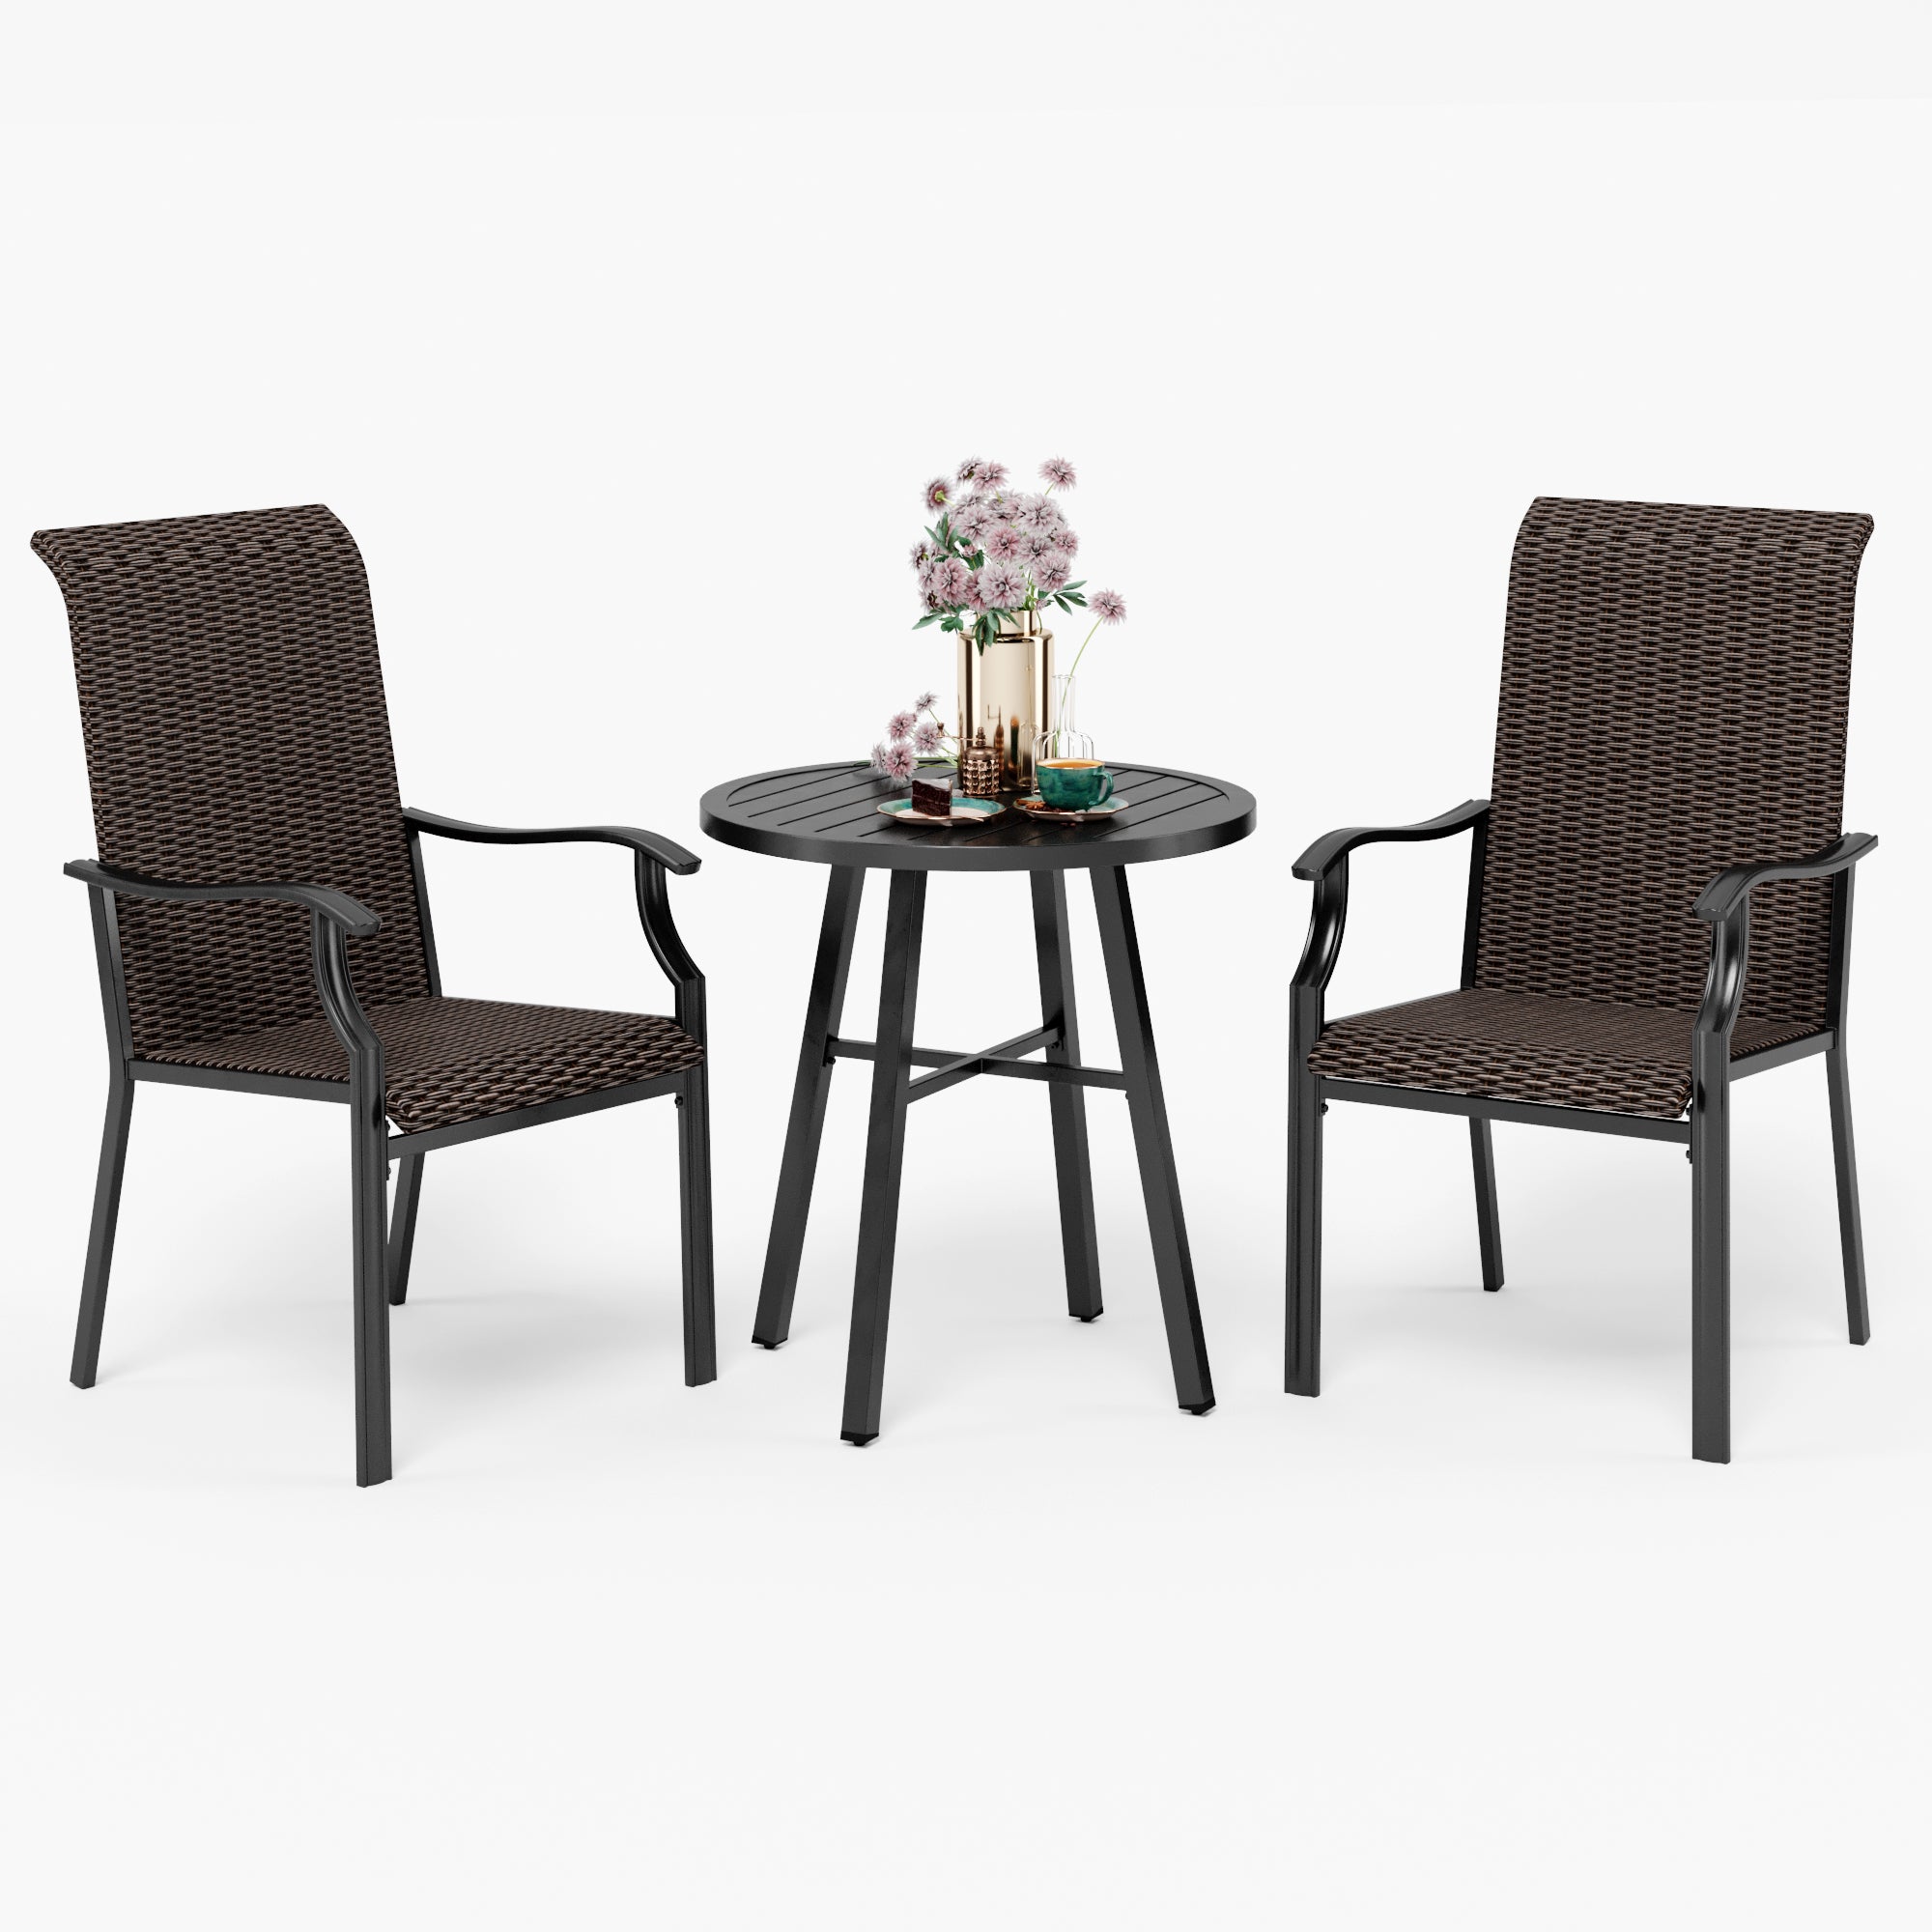 PHI VILLA 3-Piece Rattan Dining Chairs & Small Round Table Patio Bistro Set